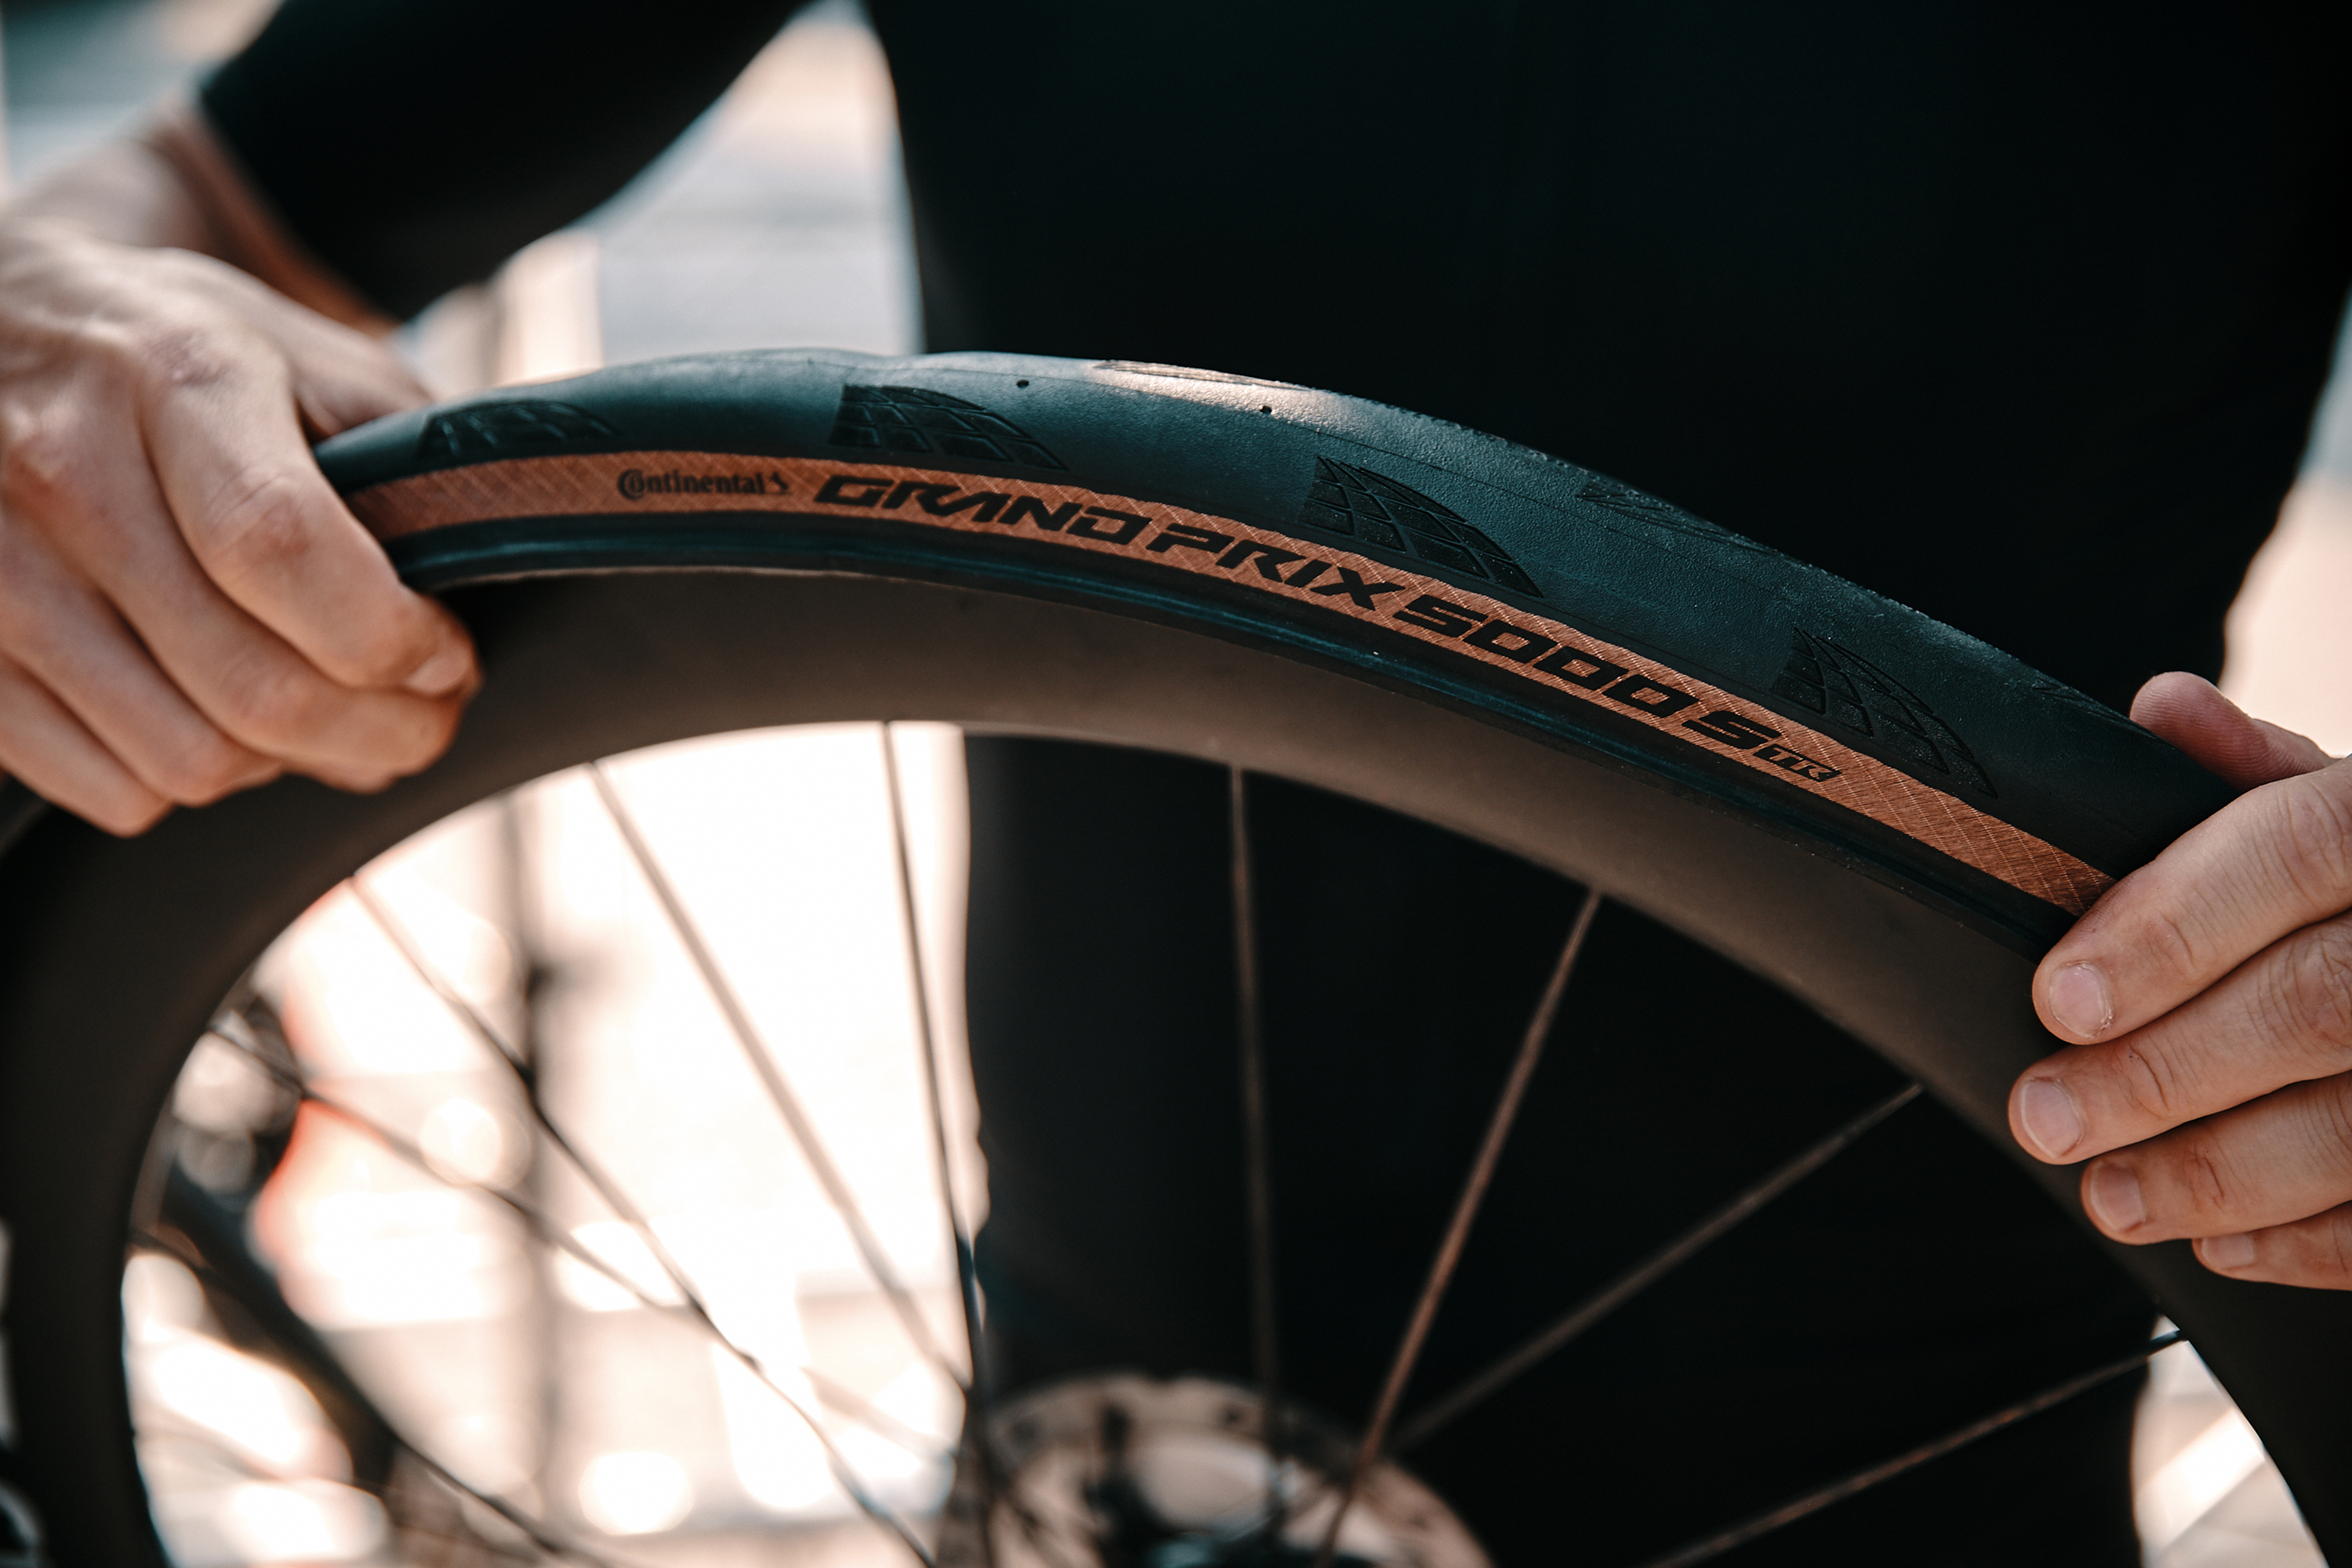 Continental's new Roubaix-winning GP5000 tubeless tyre is said to